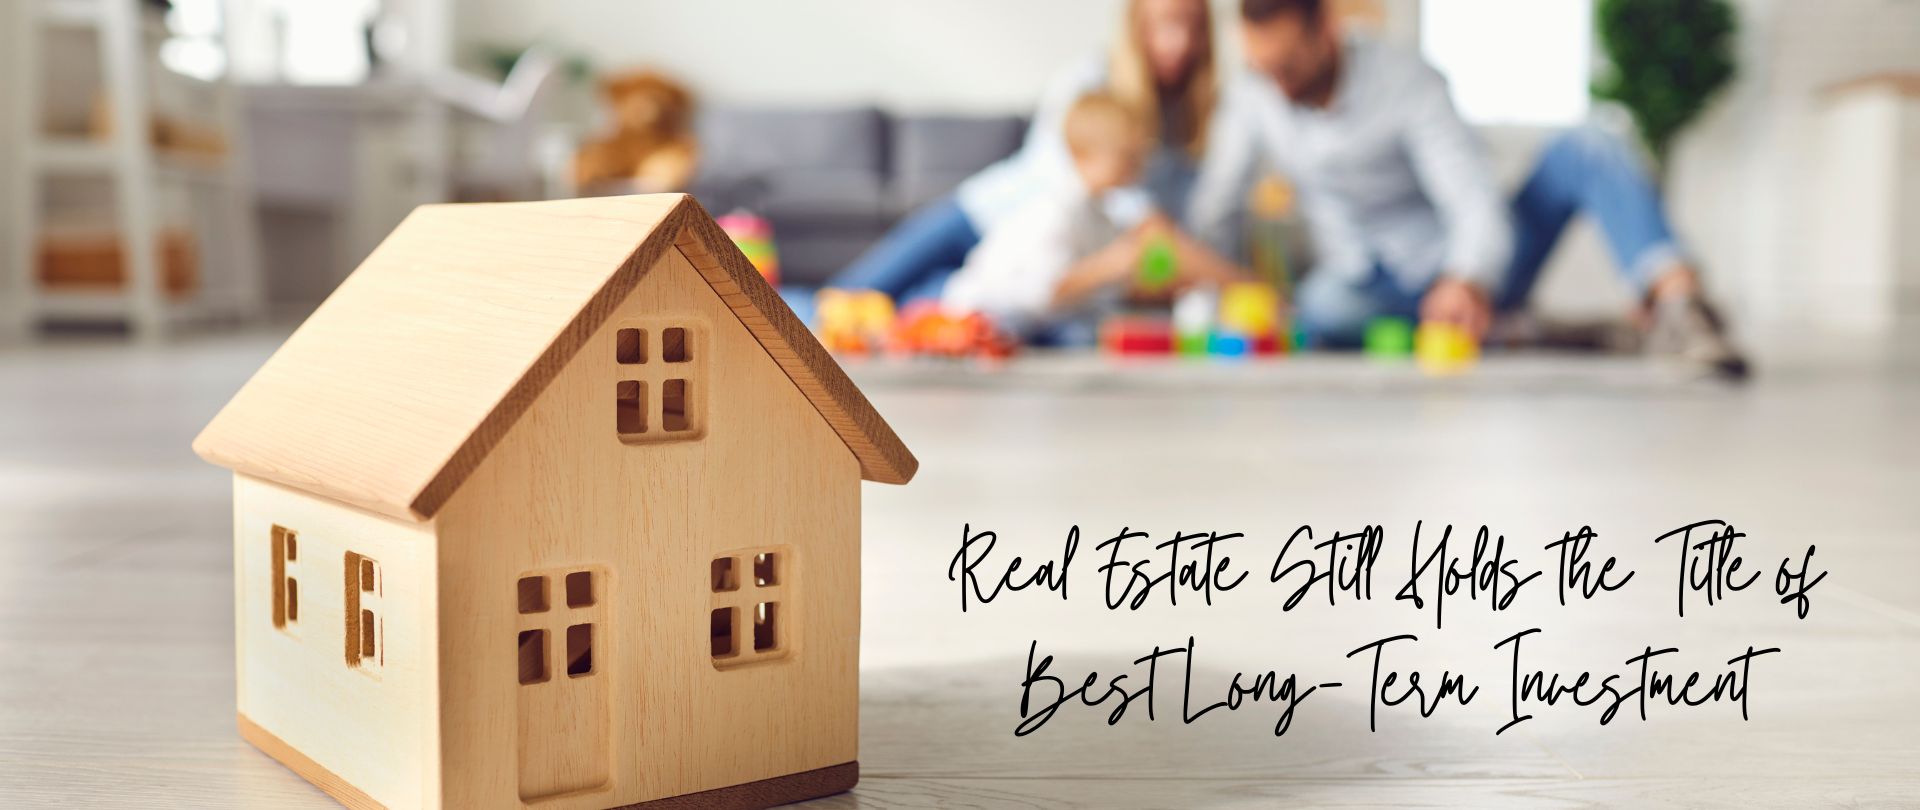 Real Estate Still Holds the Title of Best Long-Term Investment